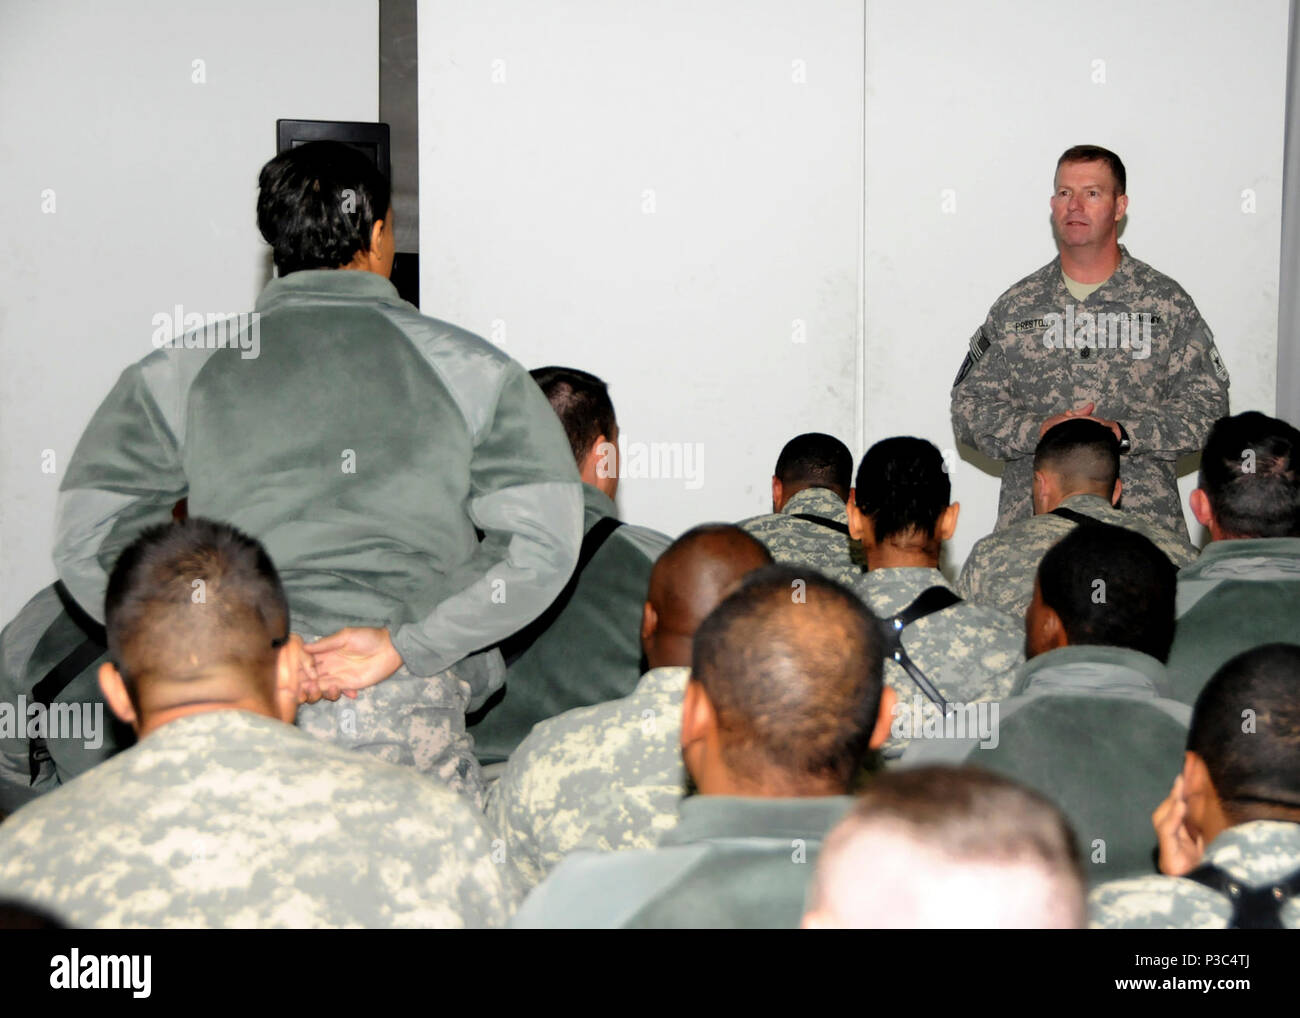 - CAMP EGGERS, Afghanistan – Sergeant Major of the Army Kenneth Preston speaks with Soldiers of NATO Training Mission – Afghanistan at Camp Eggers Dec. 7, 2009. During his visit, Preston responded to the Soldiers questions and concerns and thanked them for their service. Stock Photo